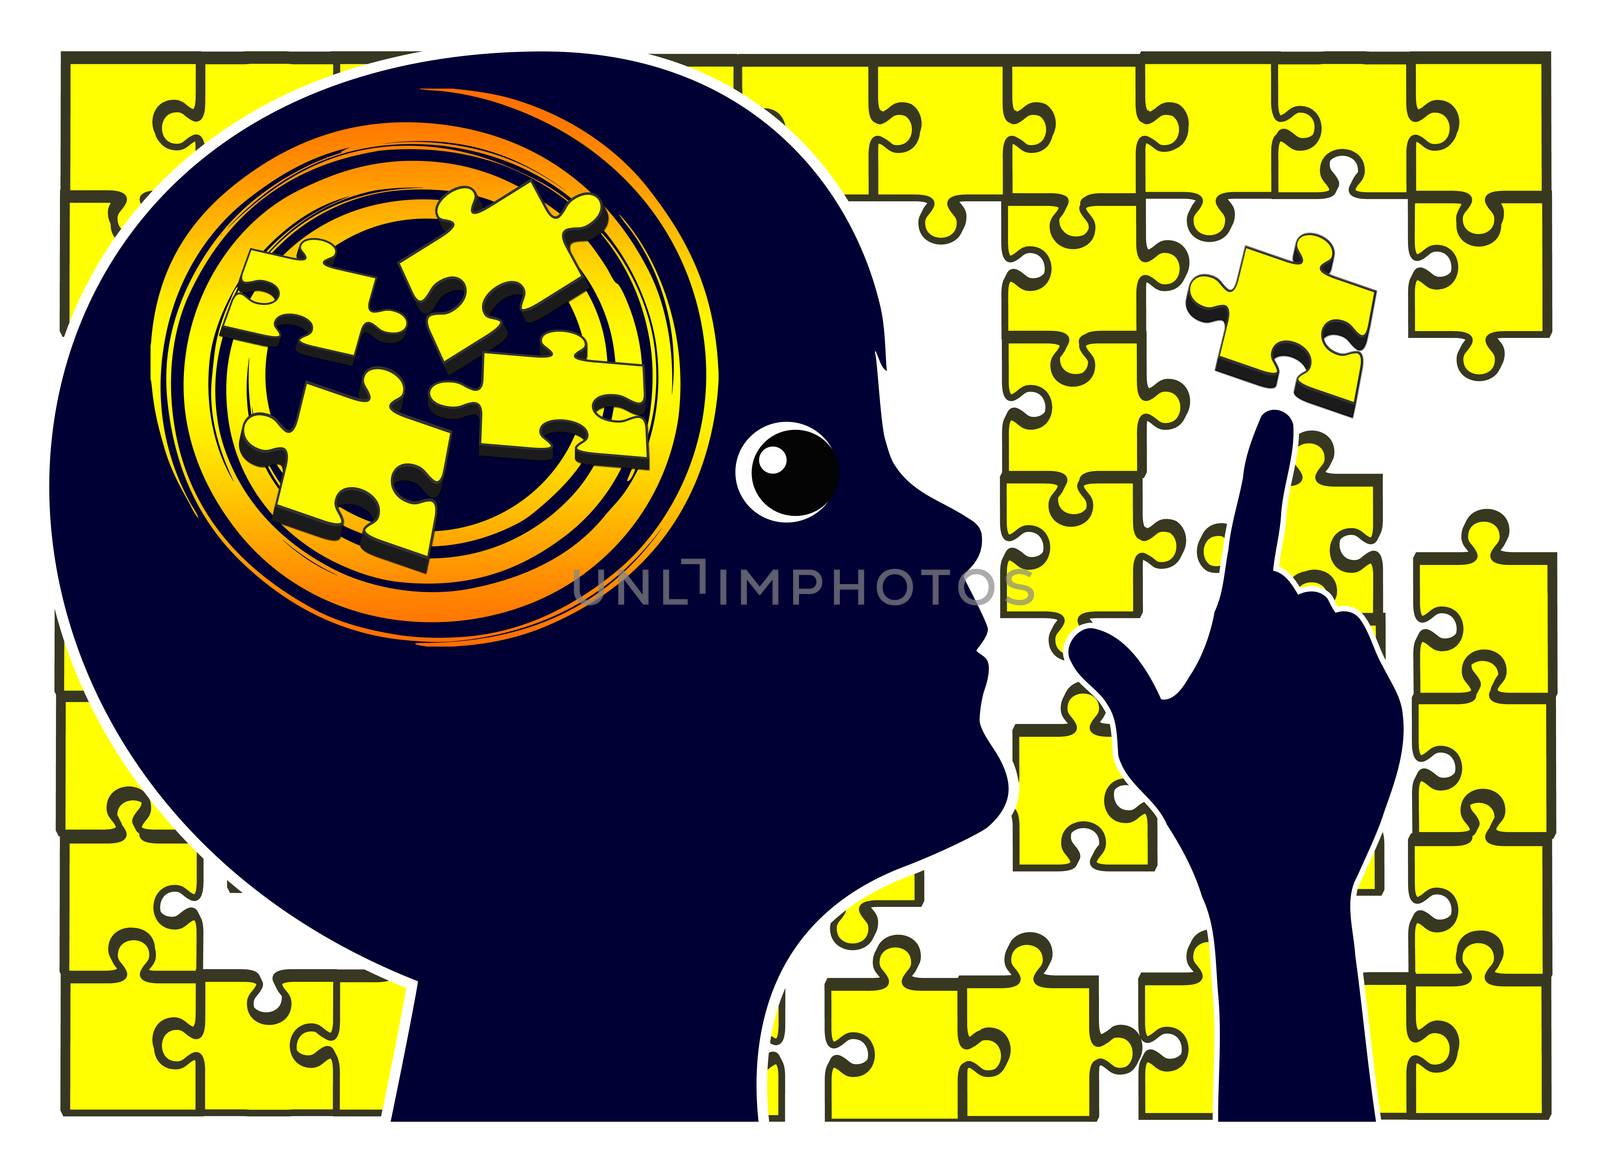 Puzzles are brain teasers for kids in early childhood education